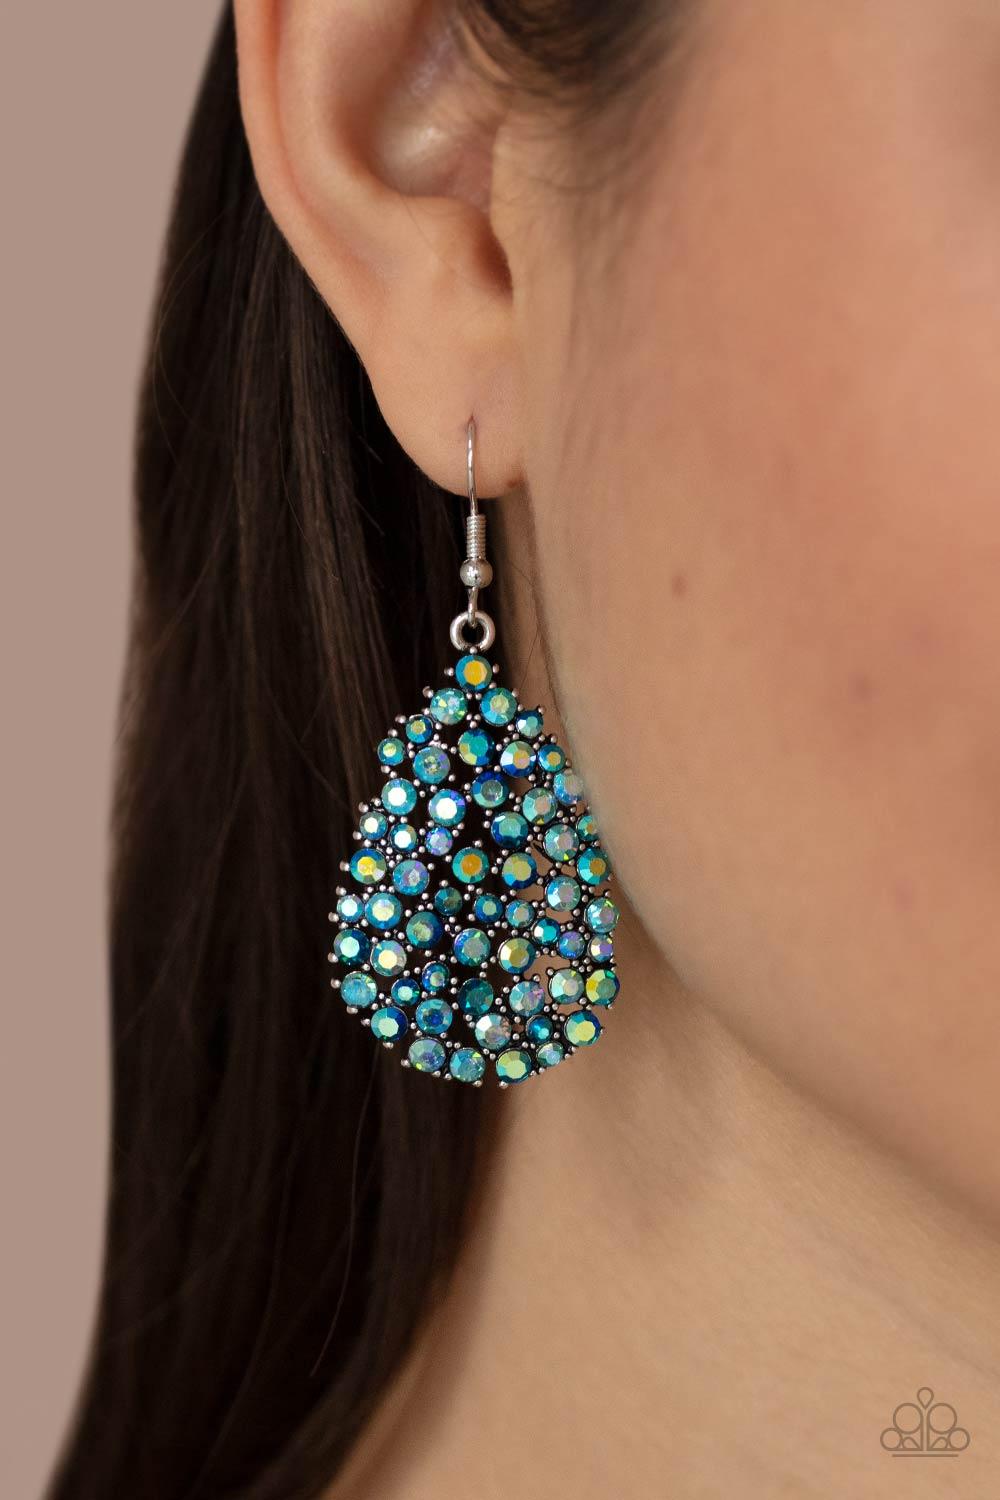 Paparazzi Accessories Daydreamy Dazzle - Multi Featuring studded silver fittings, a smoldering collection of iridescent rhinestones coalesce into a dazzling teardrop frame. Earring attaches to a standard fishhook fitting. Sold as one pair of earrings. Jew